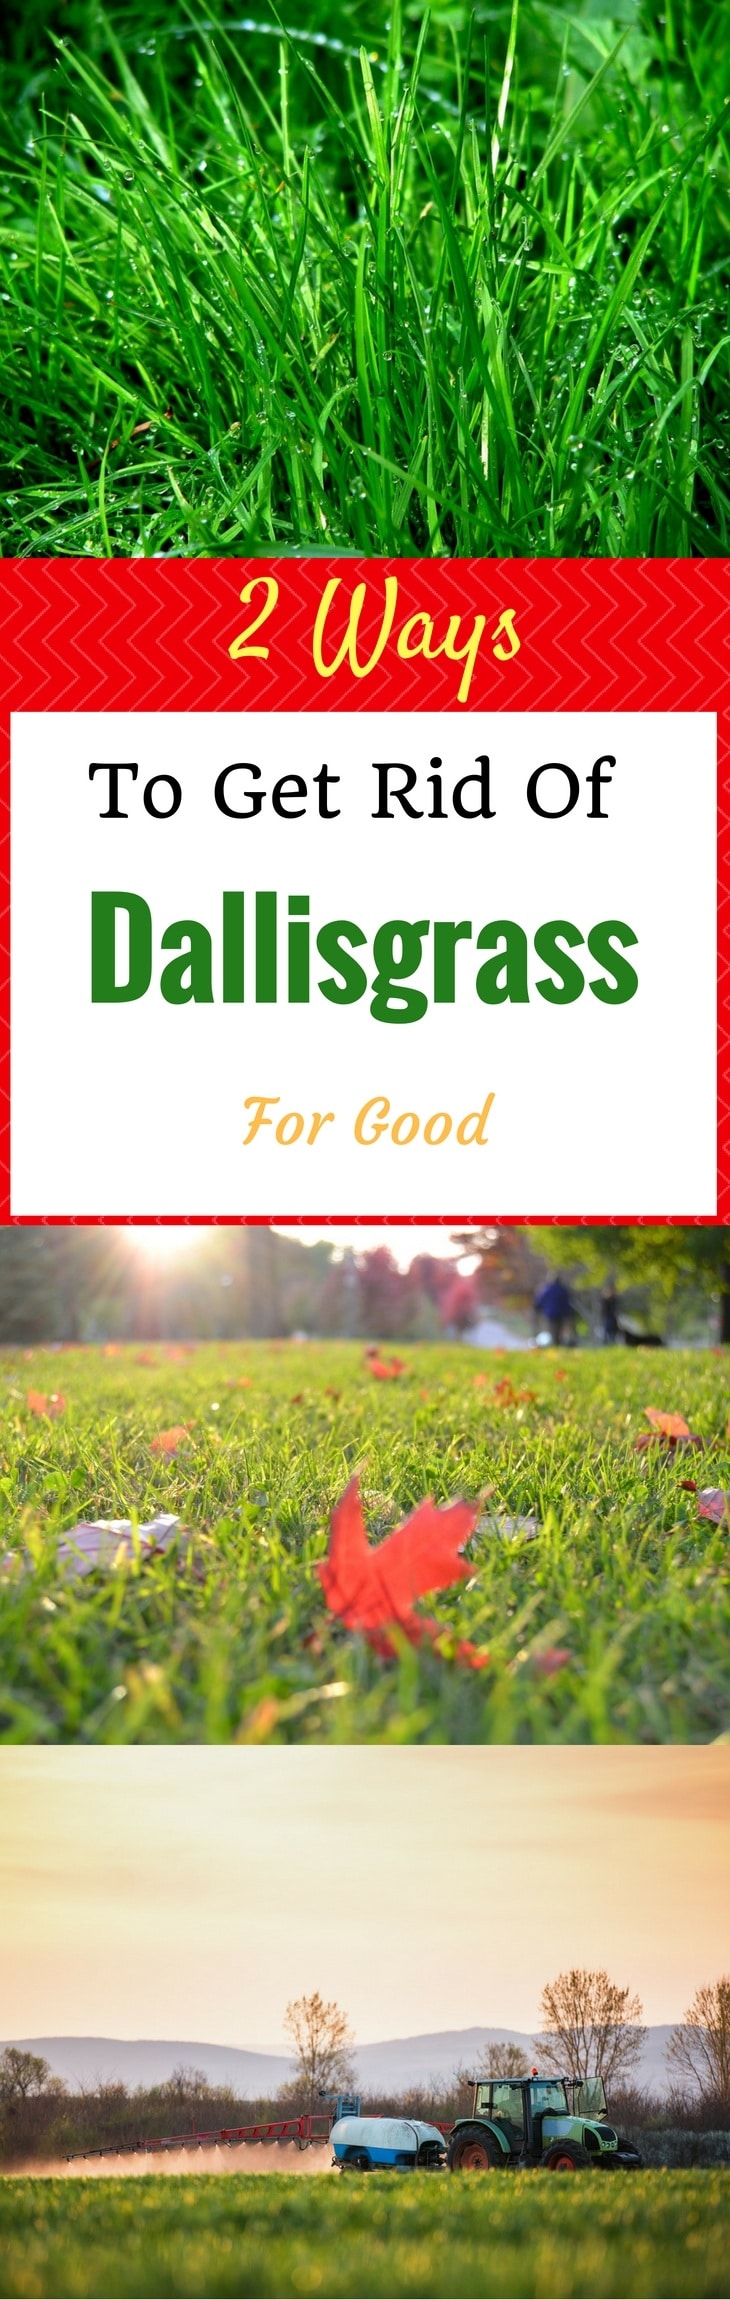 2 Ways To Get Rid Of Dallisgrass For Good